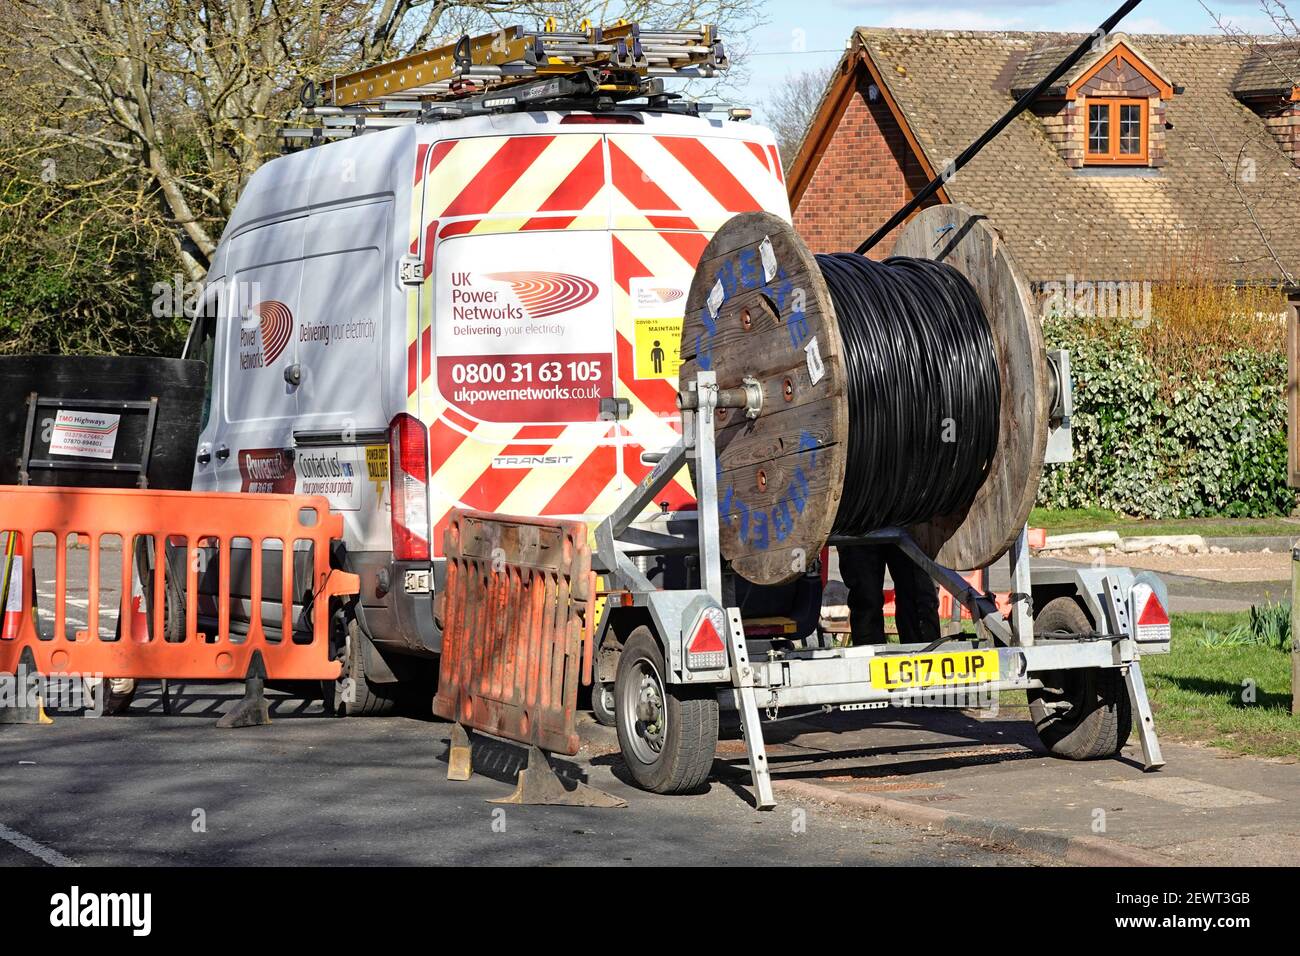 UK Power Networks distribution business van & cable drum trailer replacing electricity network overhead cables supply village location Essex England Stock Photo